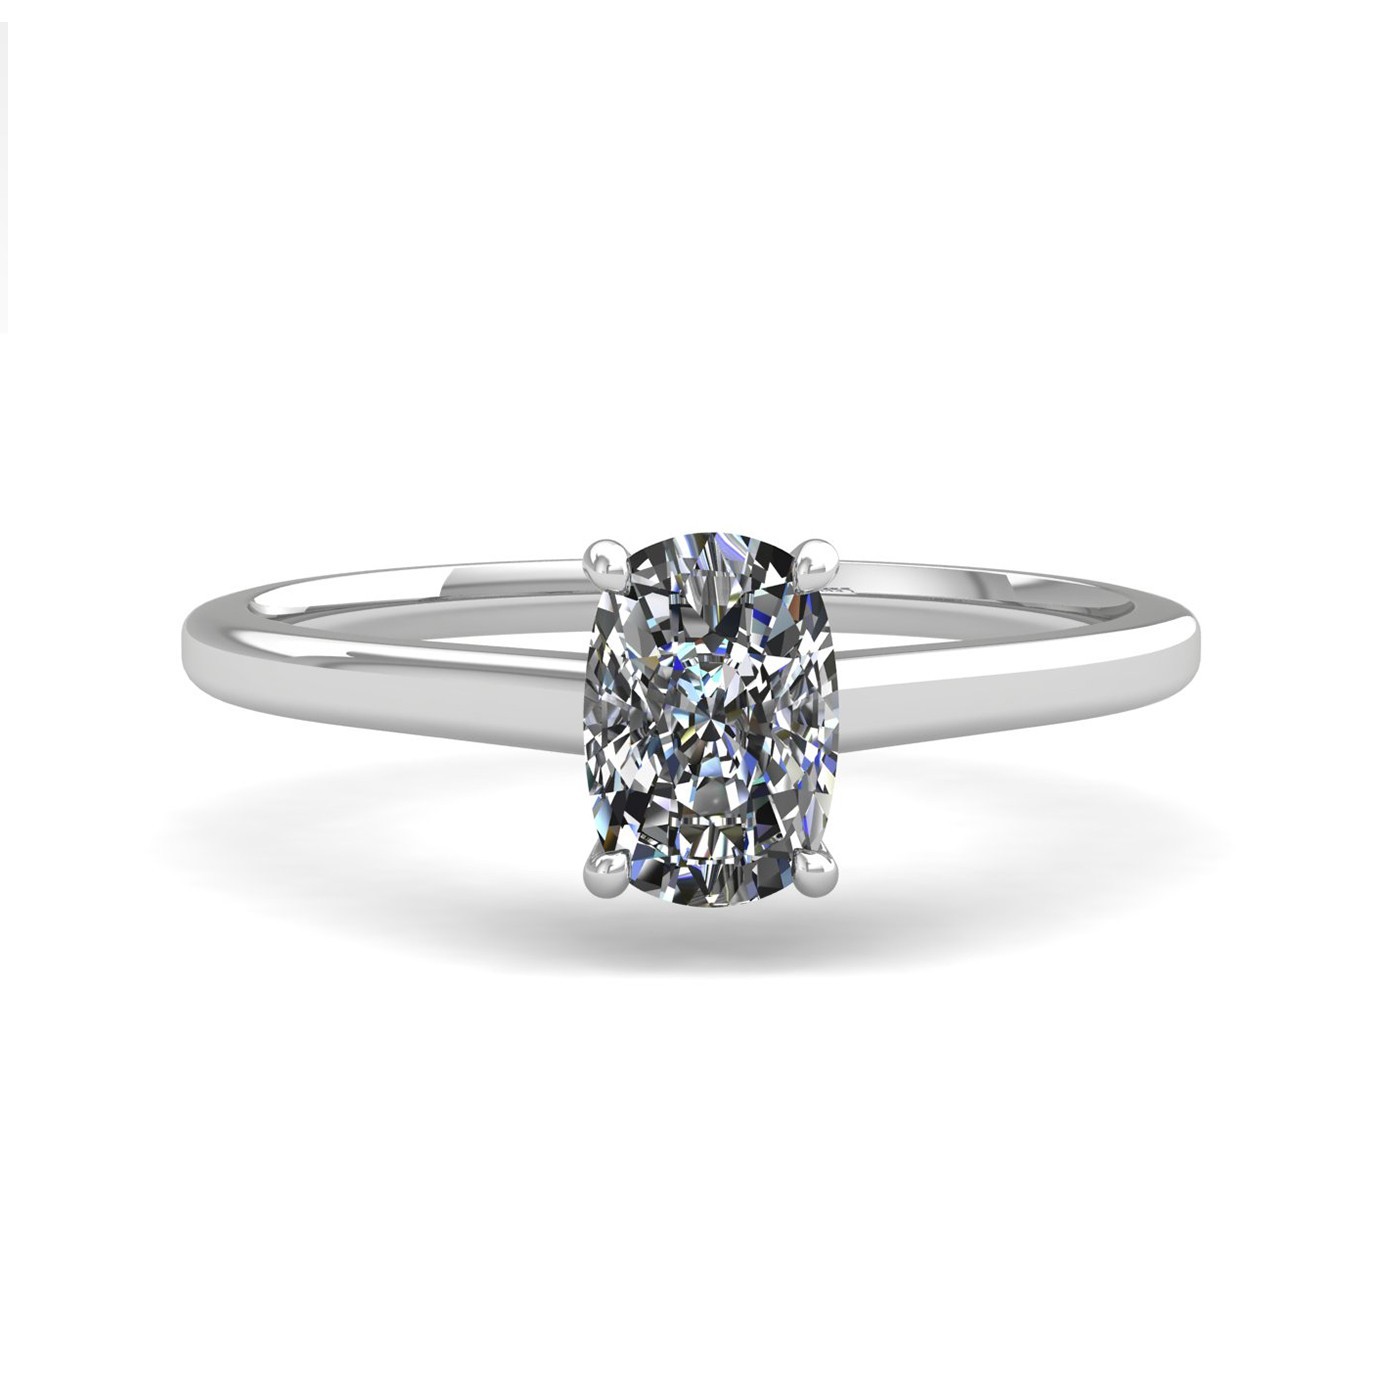 18k white gold  2.50 ct 4 prongs solitaire elongated cushion cut diamond engagement ring with whisper thin band Photos & images